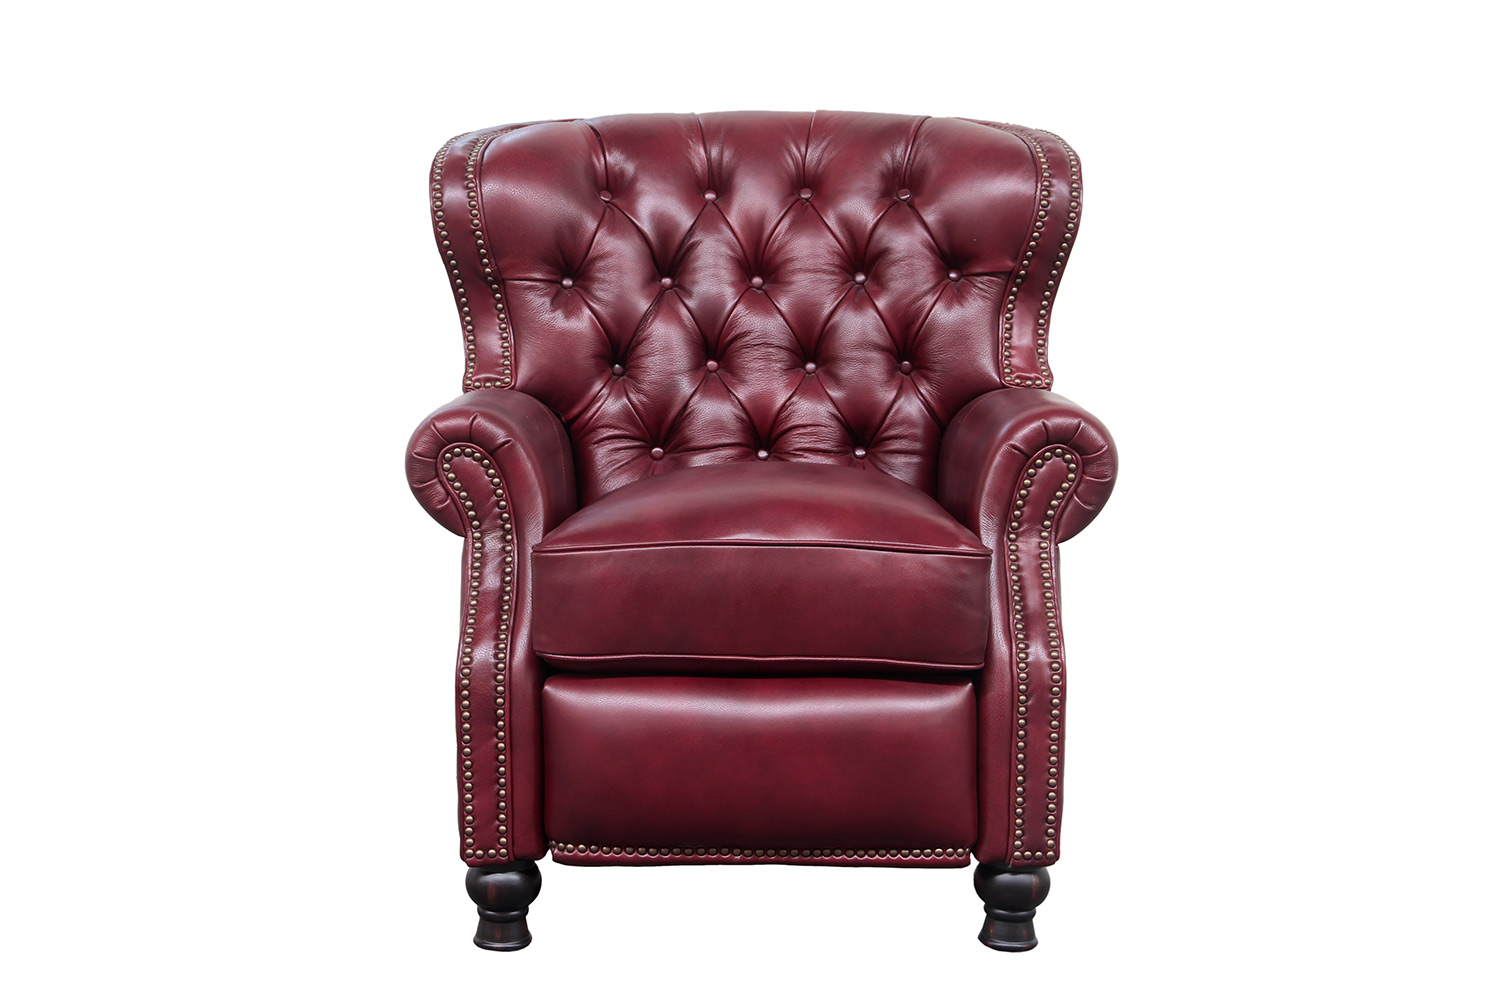 Barcalounger Presidential Recliner Chair - Wenlock Carmine/All Leather